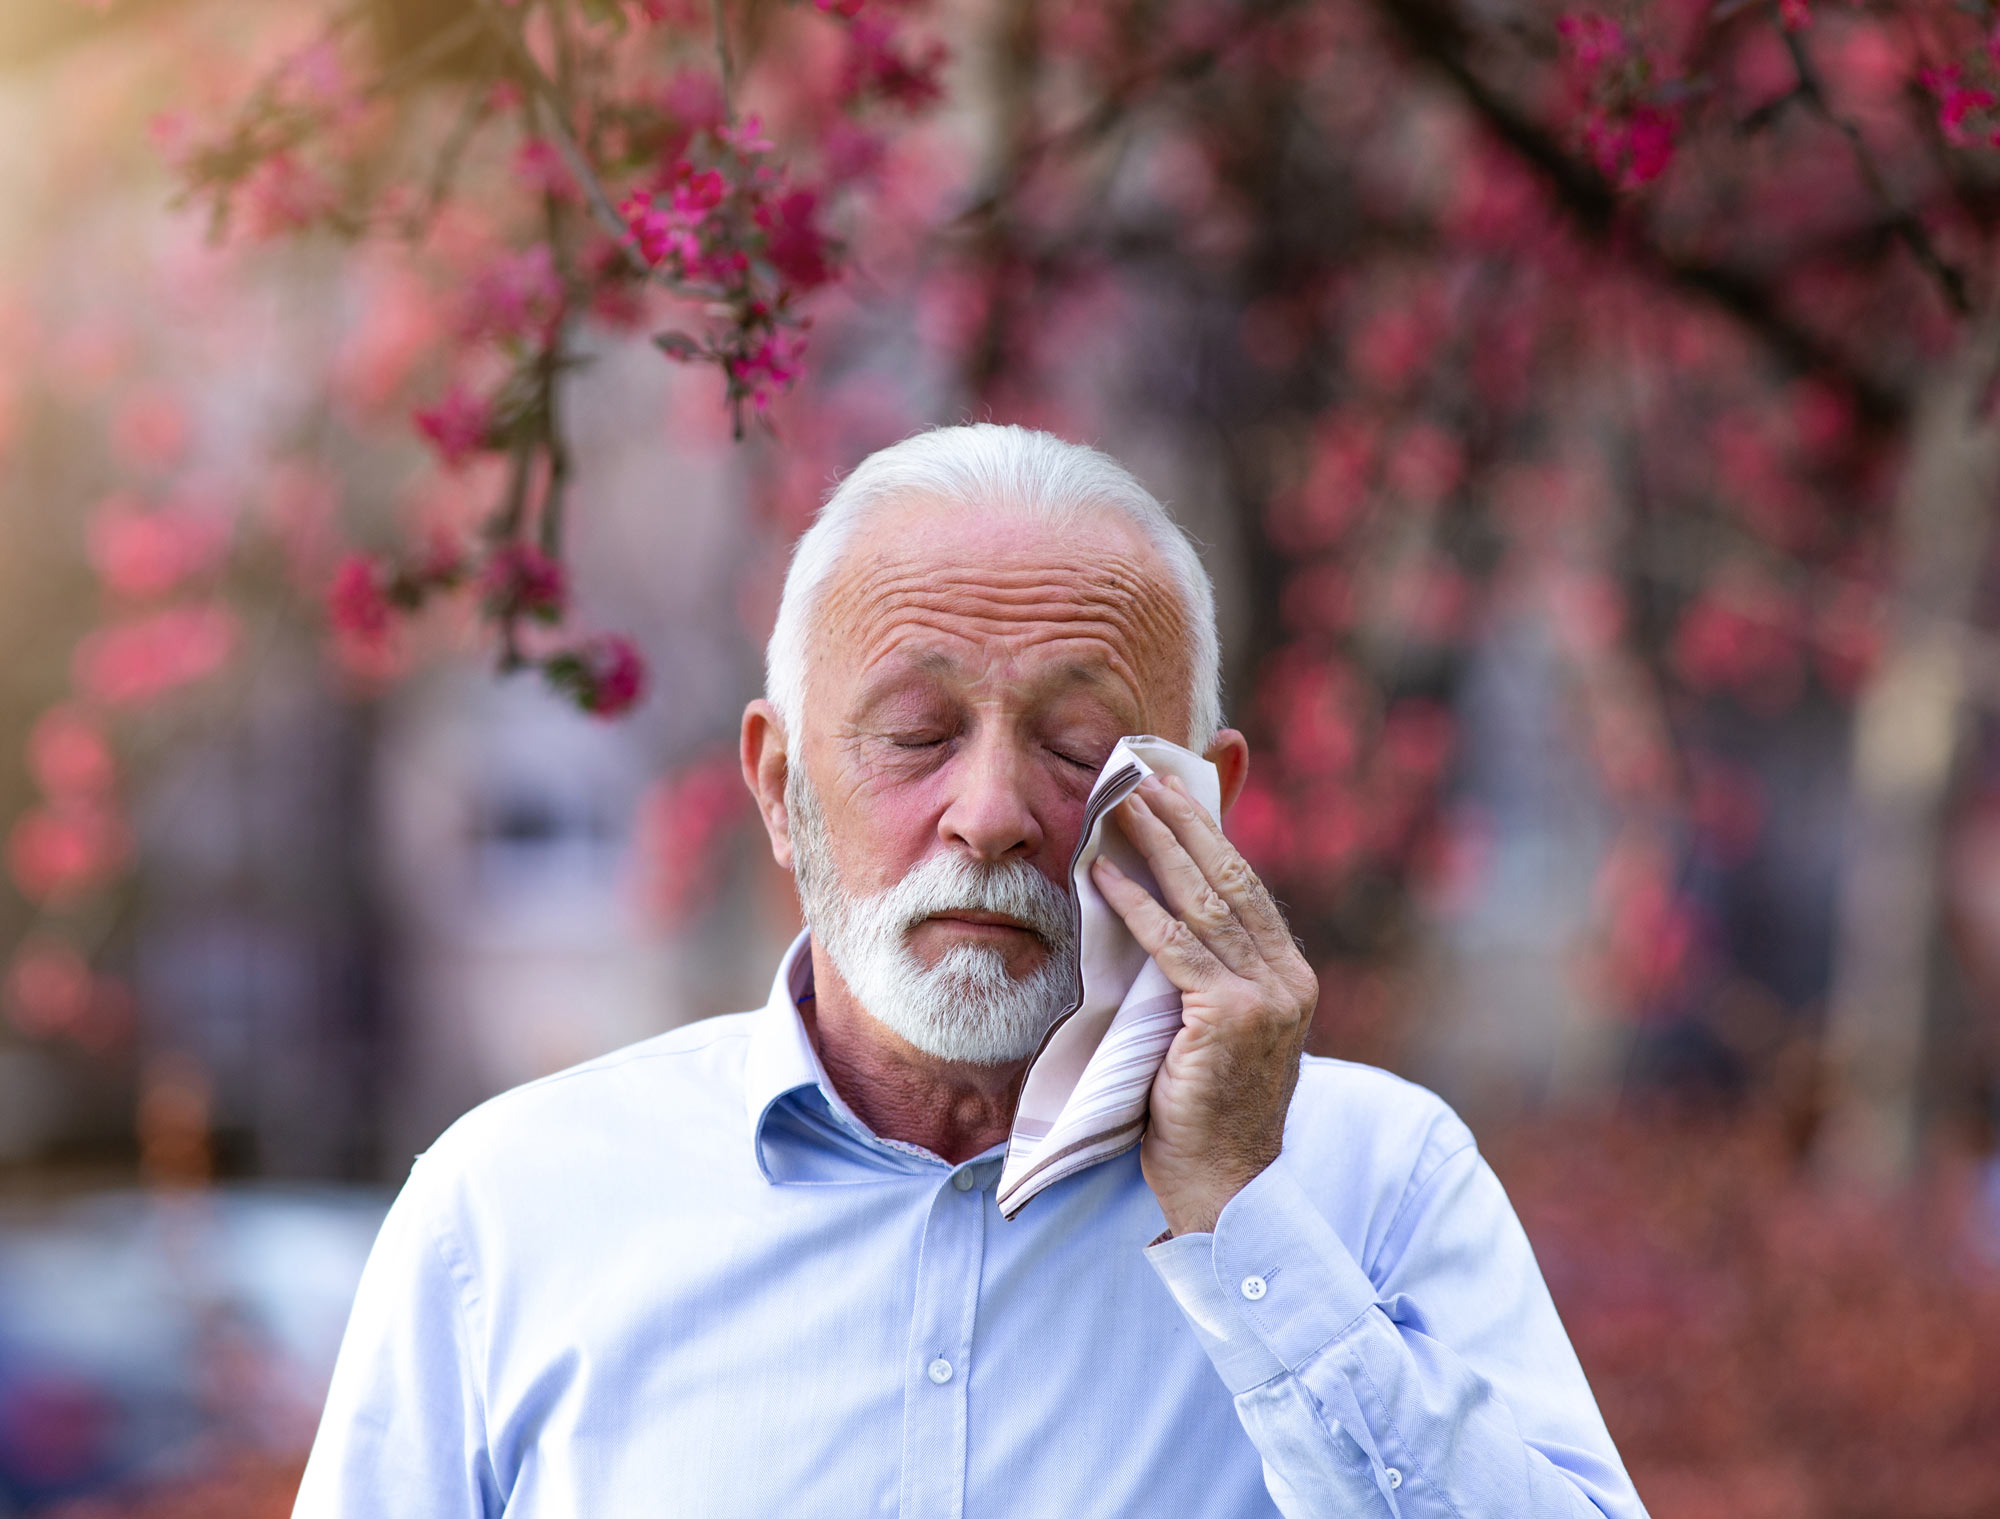 man wiping his eye with a handkerchief 